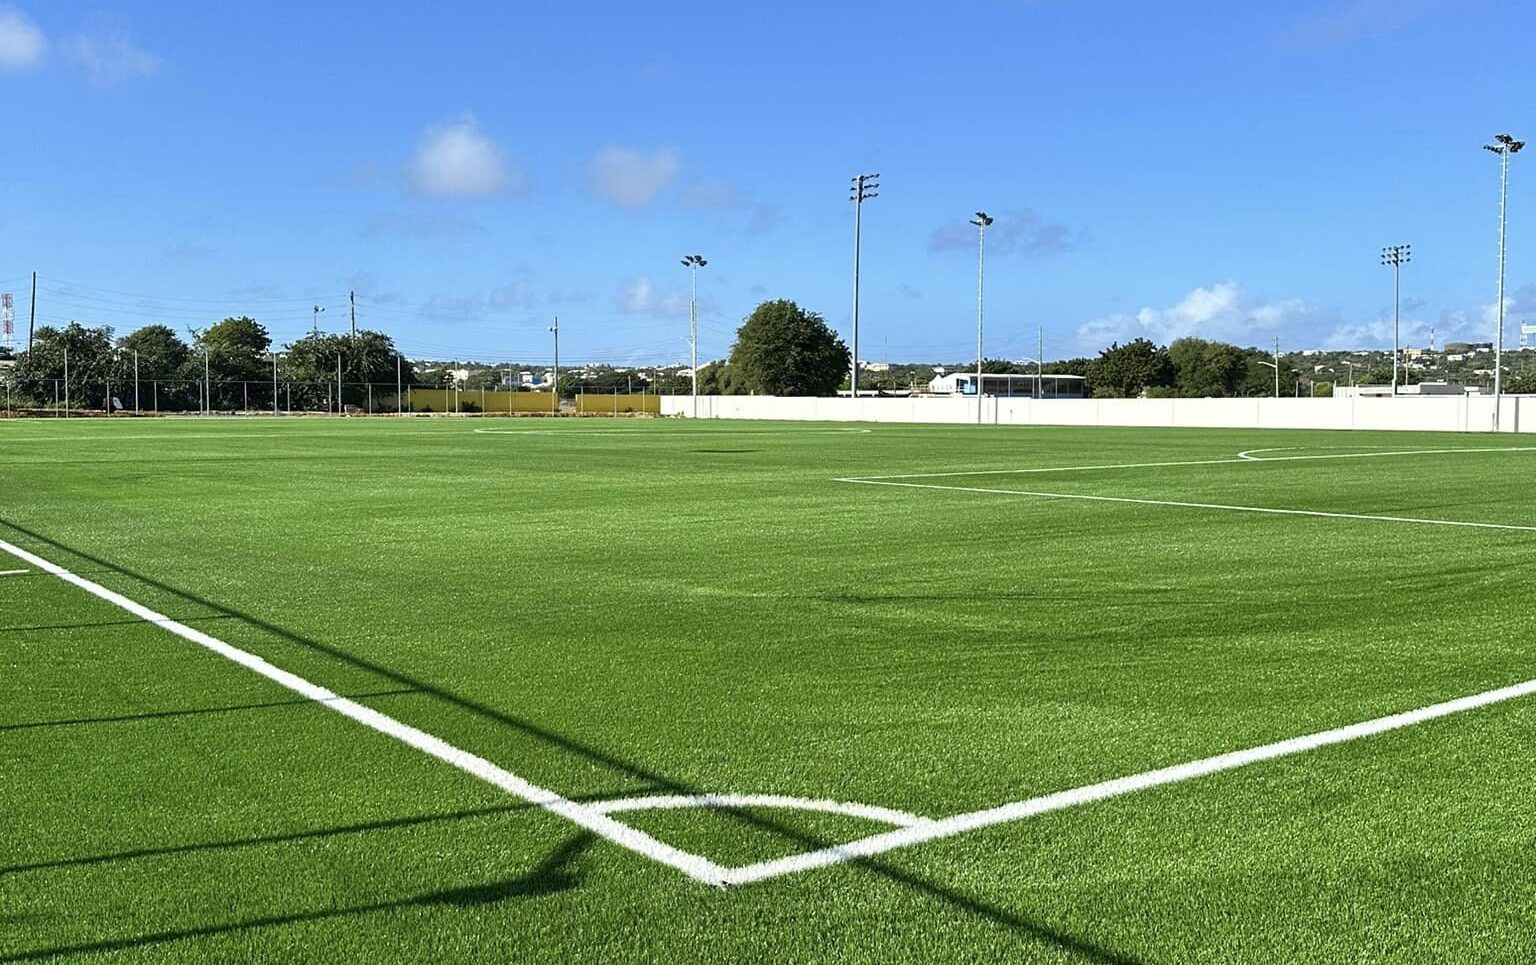 Artificial grass field is close to completion, says gov’t